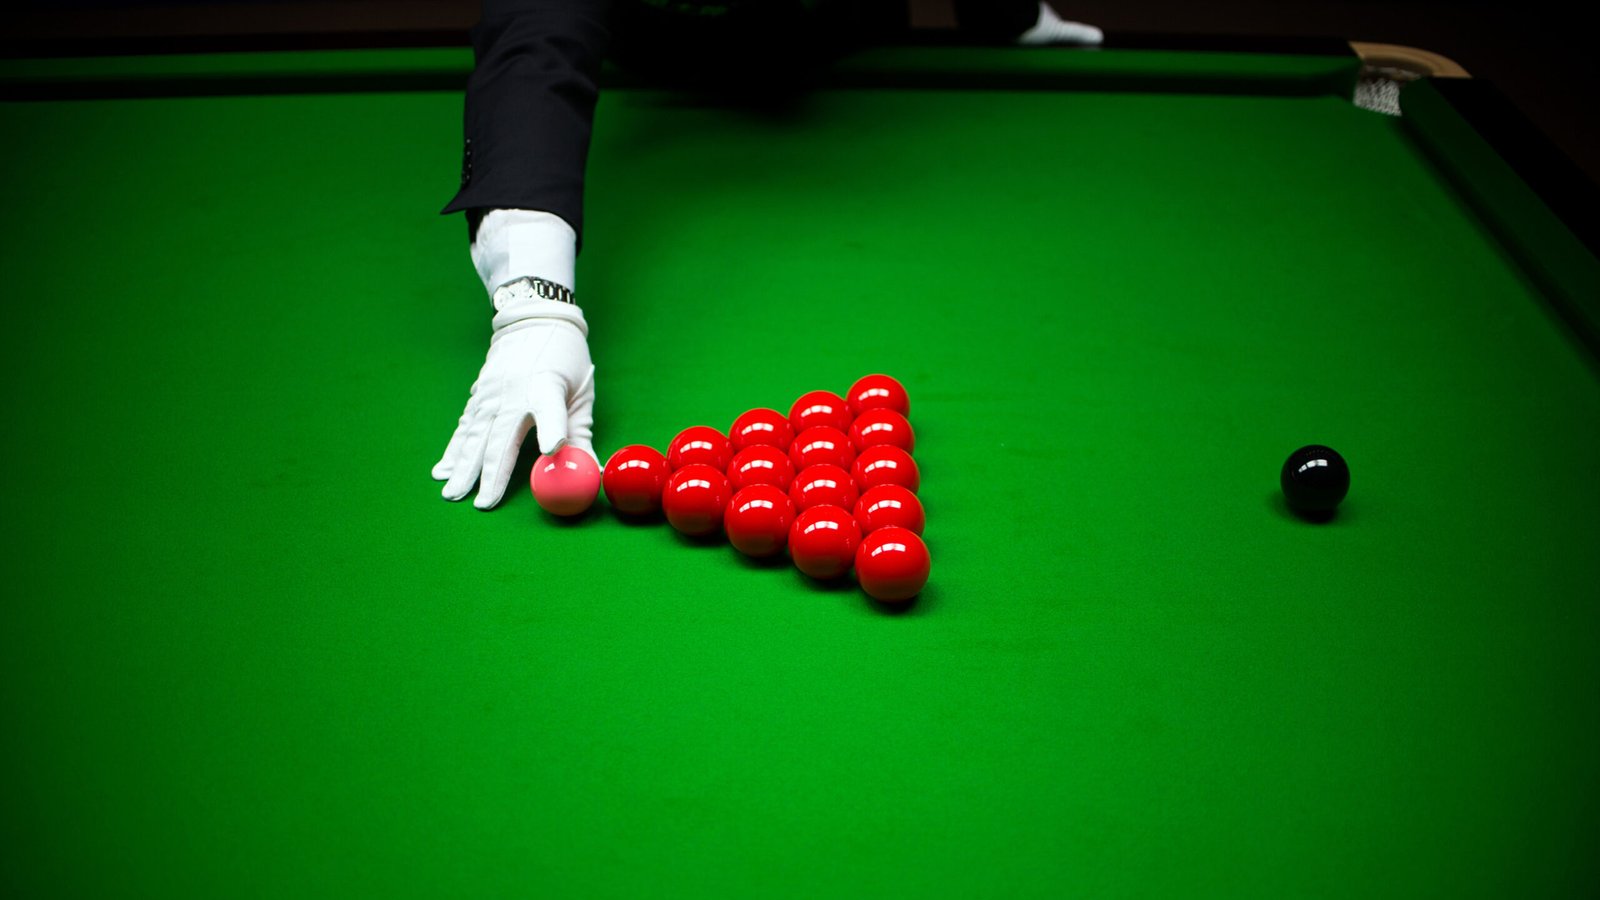 UK Snooker Championship 2023 Semi-Final Betting Tips: We’re going against Ronnie